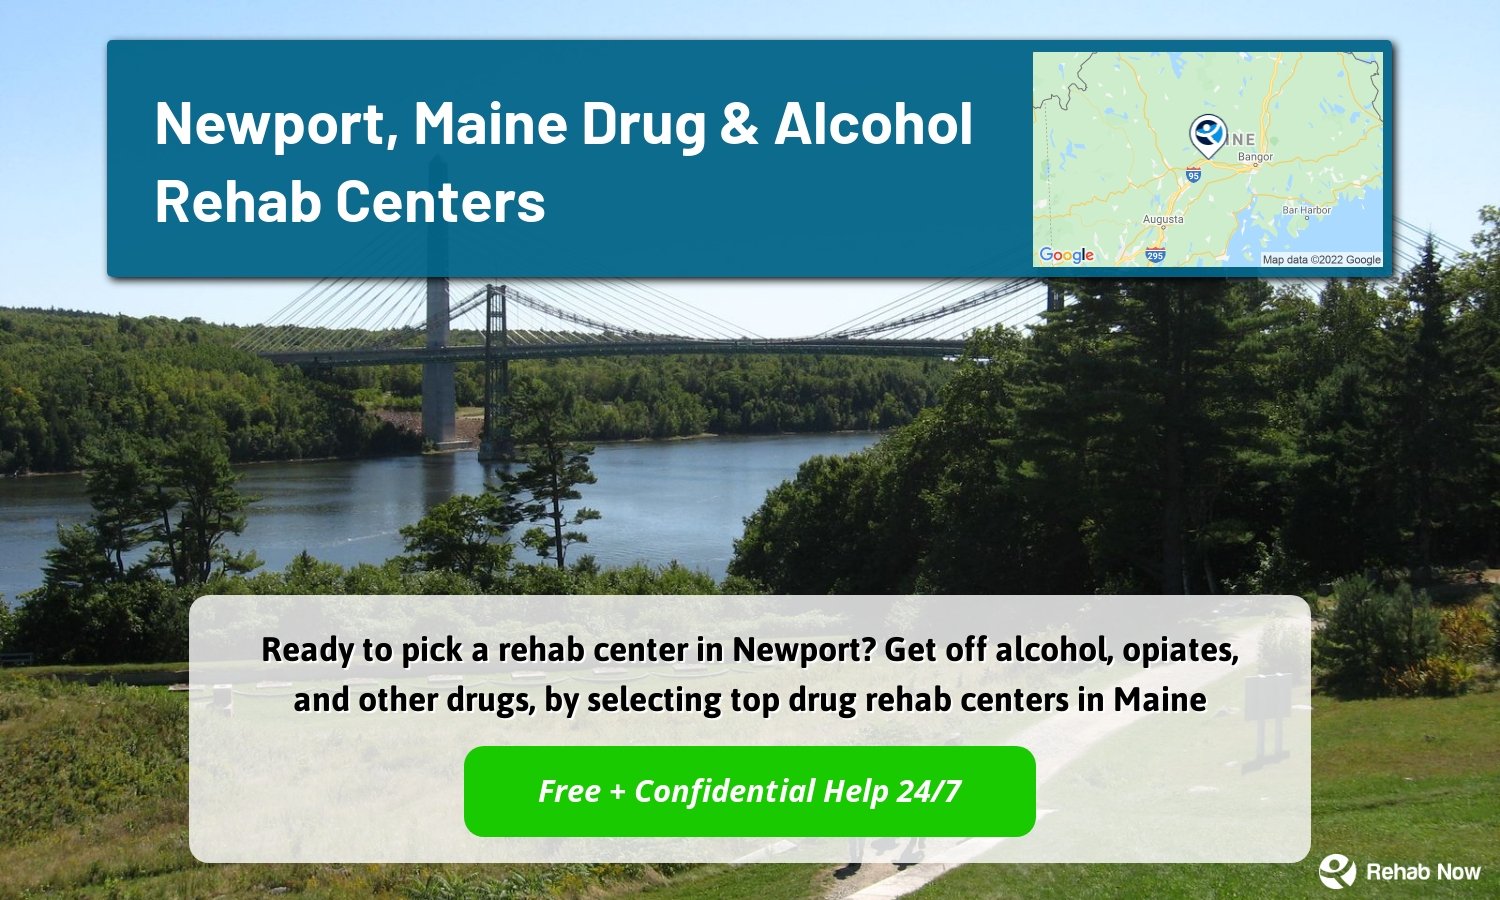 Ready to pick a rehab center in Newport? Get off alcohol, opiates, and other drugs, by selecting top drug rehab centers in Maine